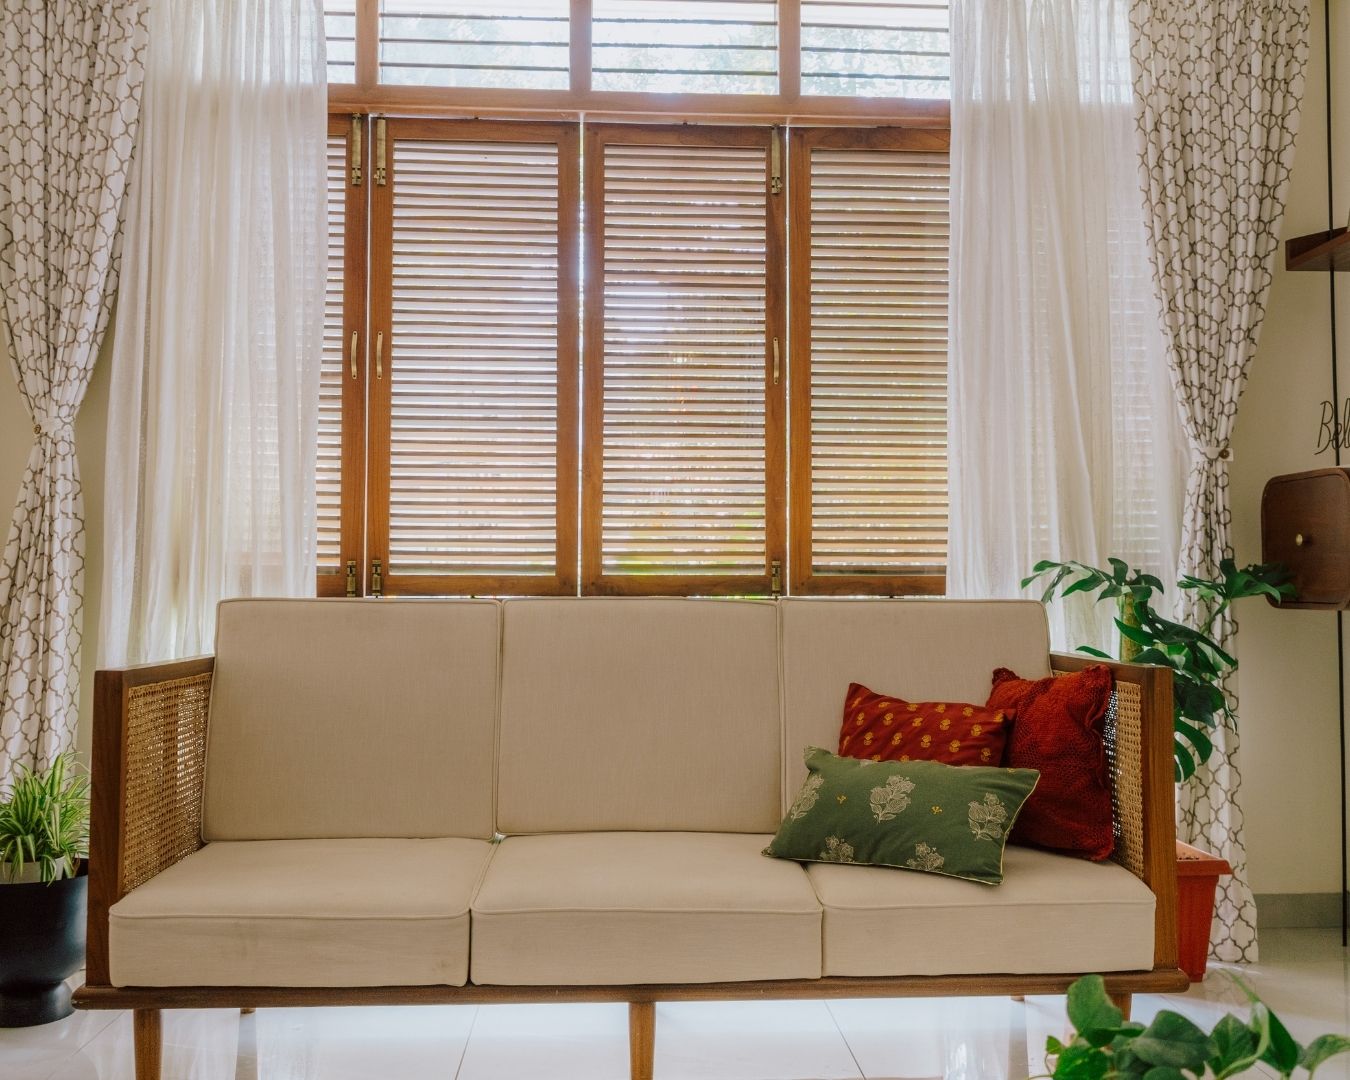 How to Drape Your Curtains in a Way that Exudes Elegance in Your Space